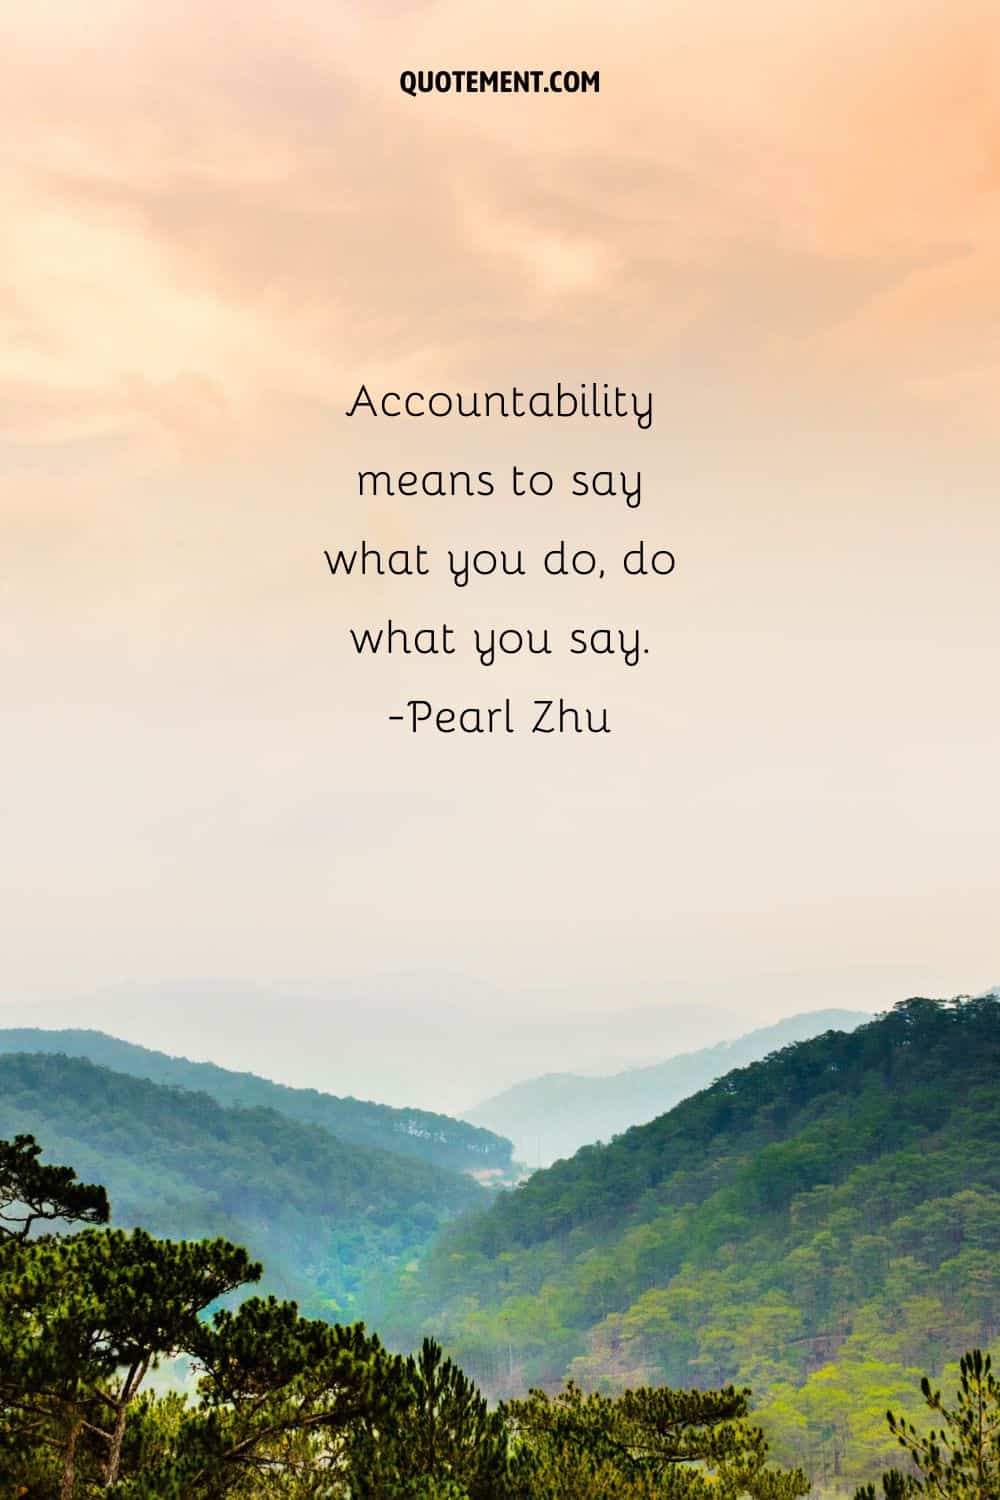 Accountability means to say what you do, do what you say